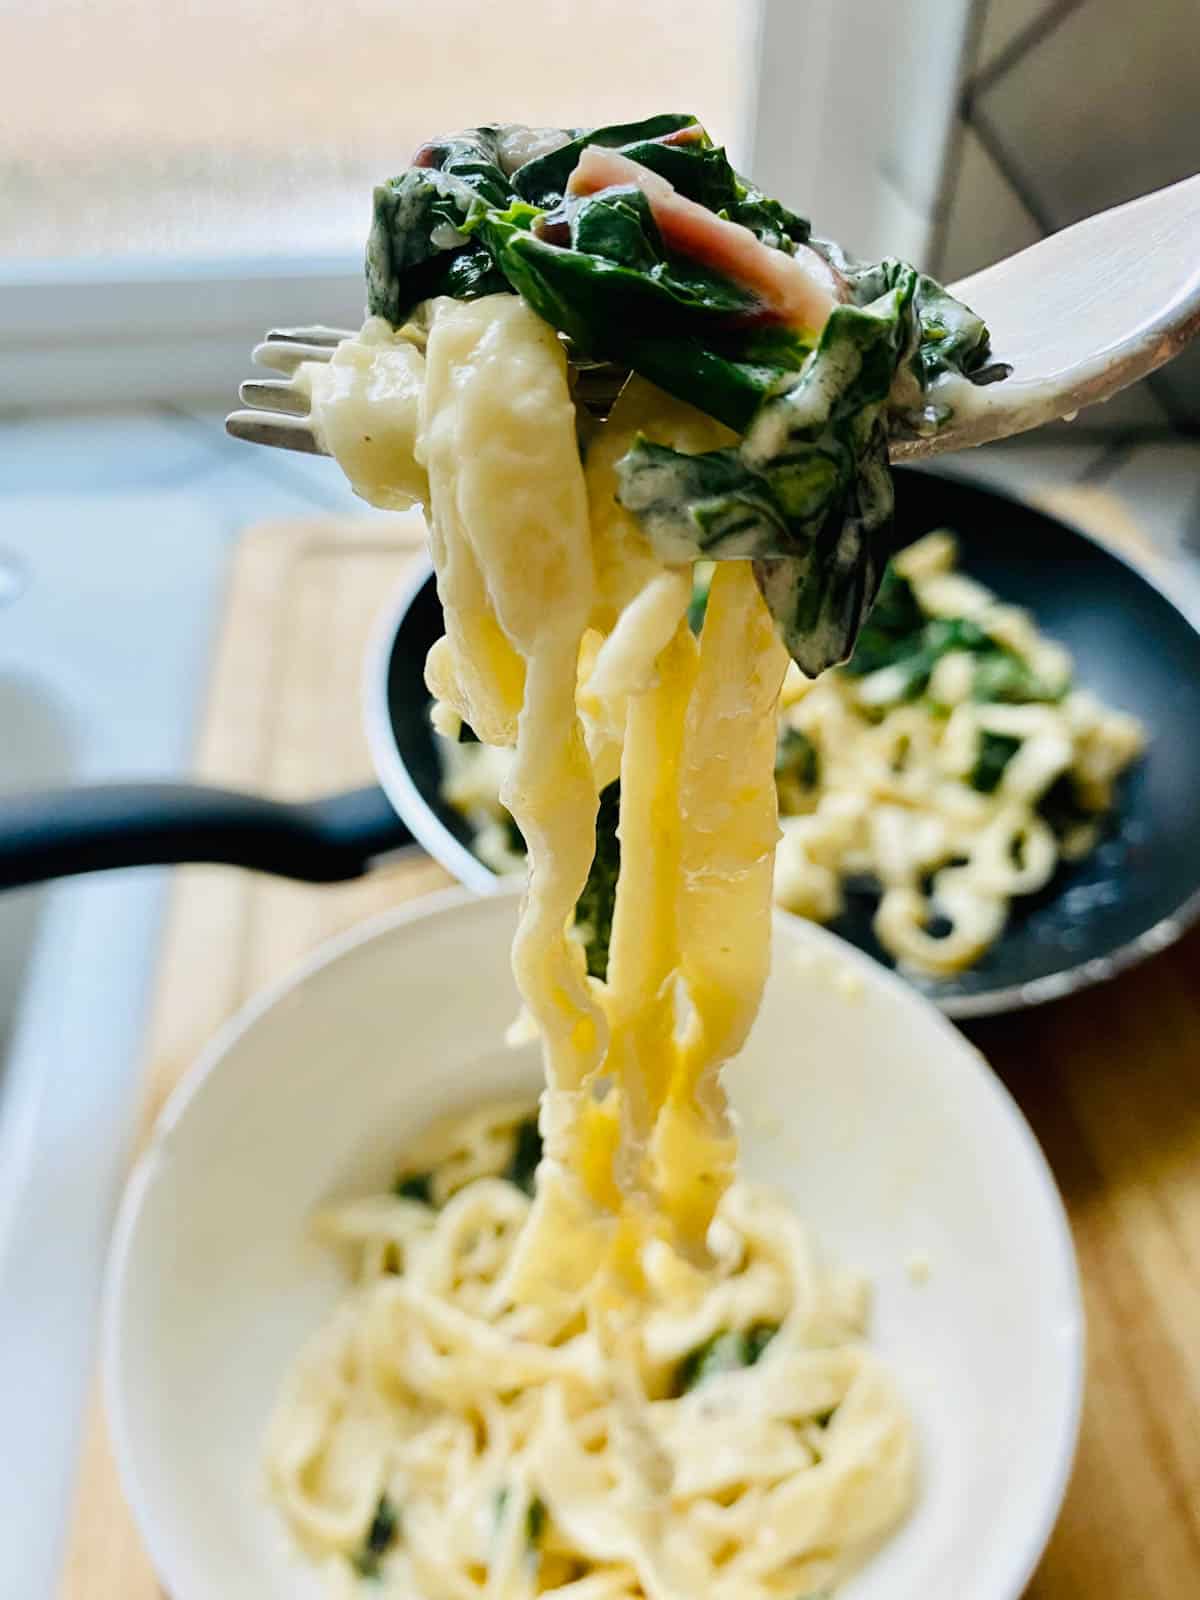 Forkful of pasta with preserved lemon Alfredo and Swiss chard. It's heavenly!